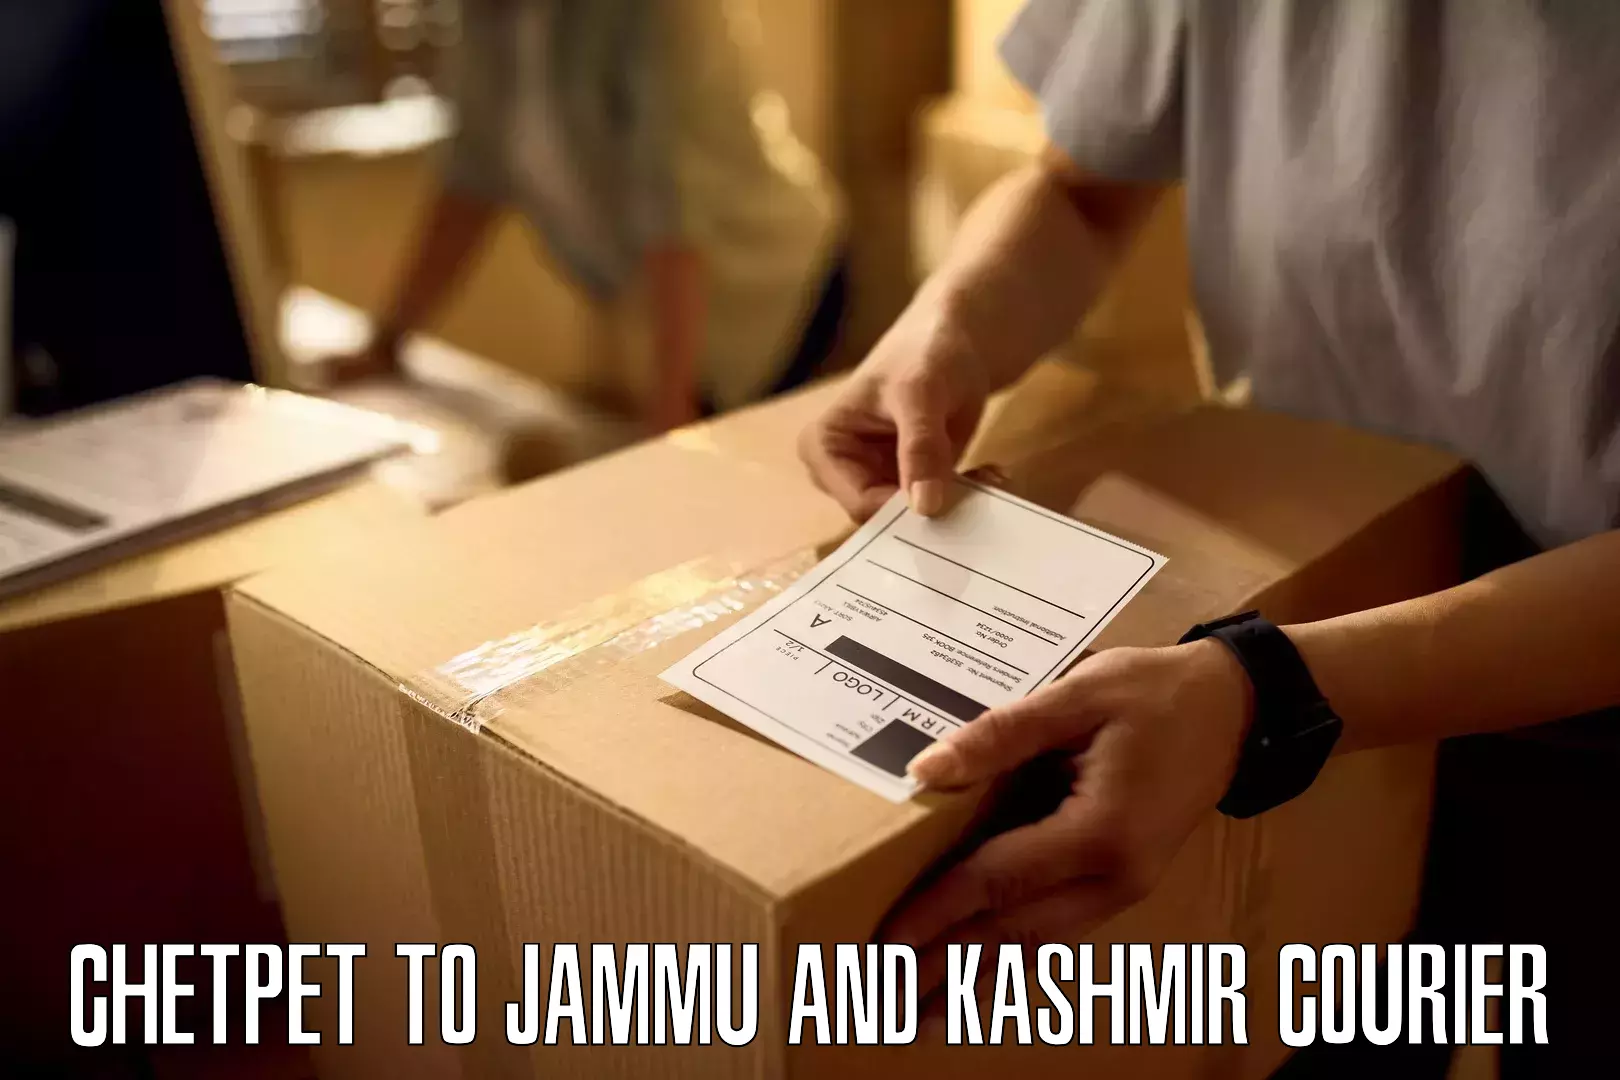 Easy access courier services Chetpet to Jammu and Kashmir